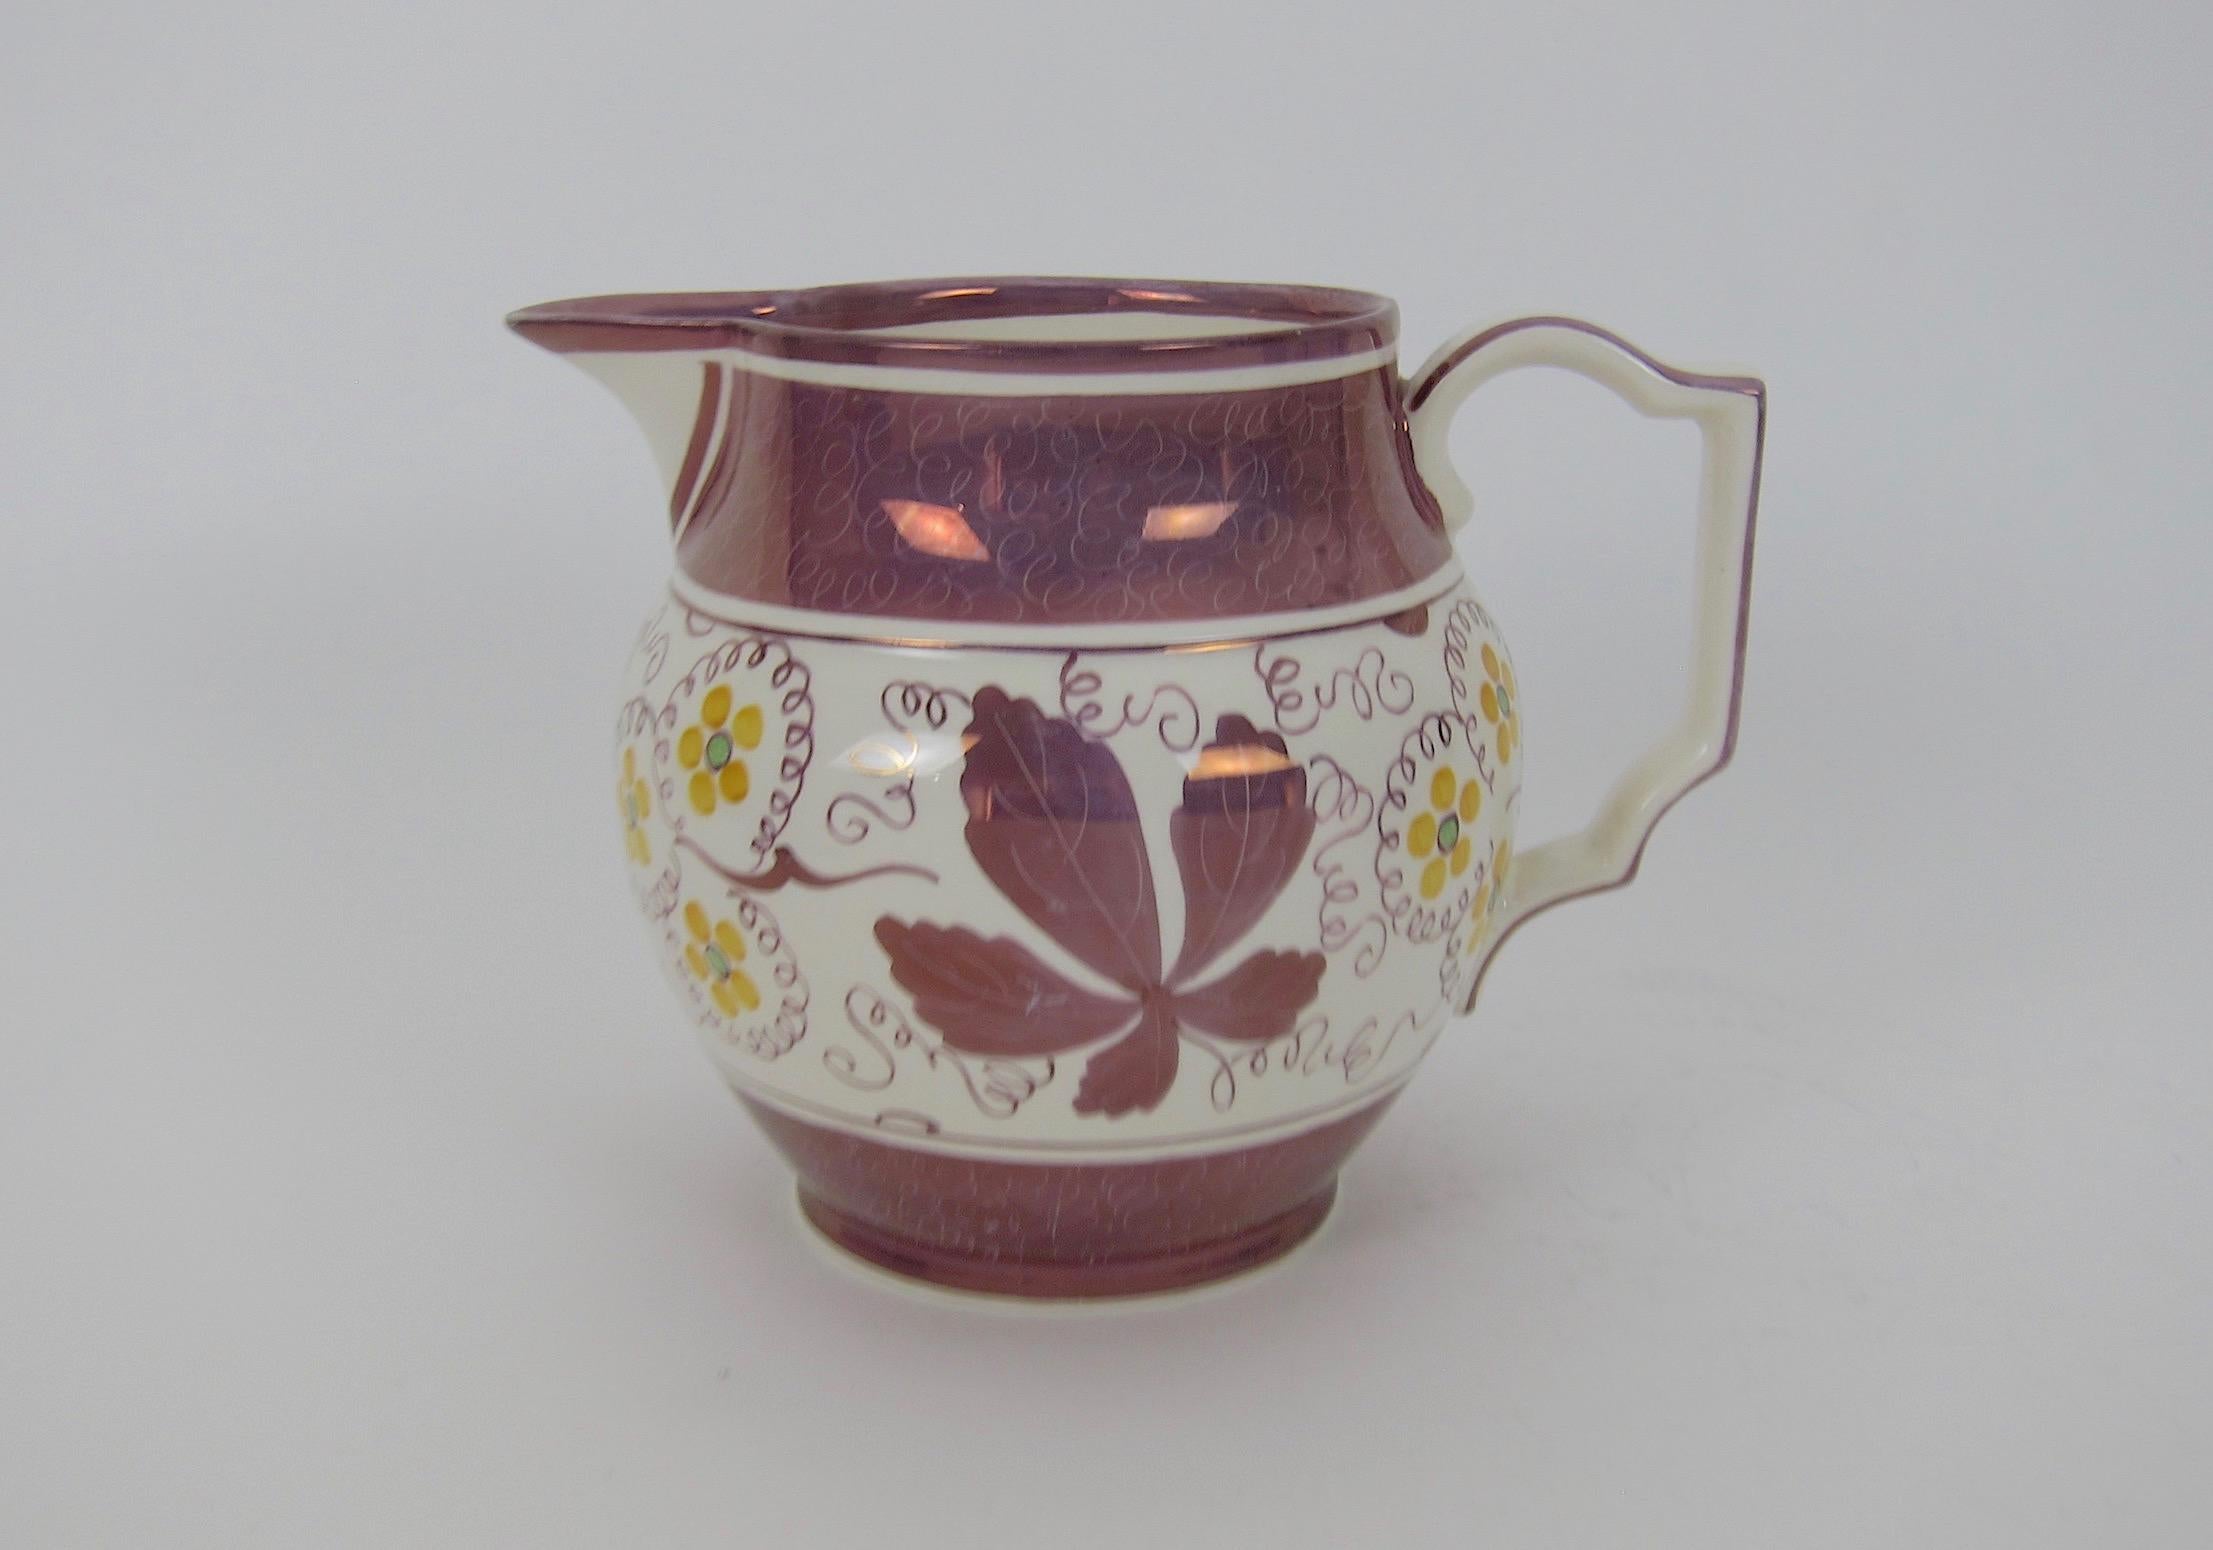 A vintage earthenware pitcher or jug decorated with a hand painted pink metallic lustre glaze from Gray's Pottery at Stoke-on-Trent, England. Although created between 1933 and 1945, the pitcher's ivory ground is decorated in the style of antique